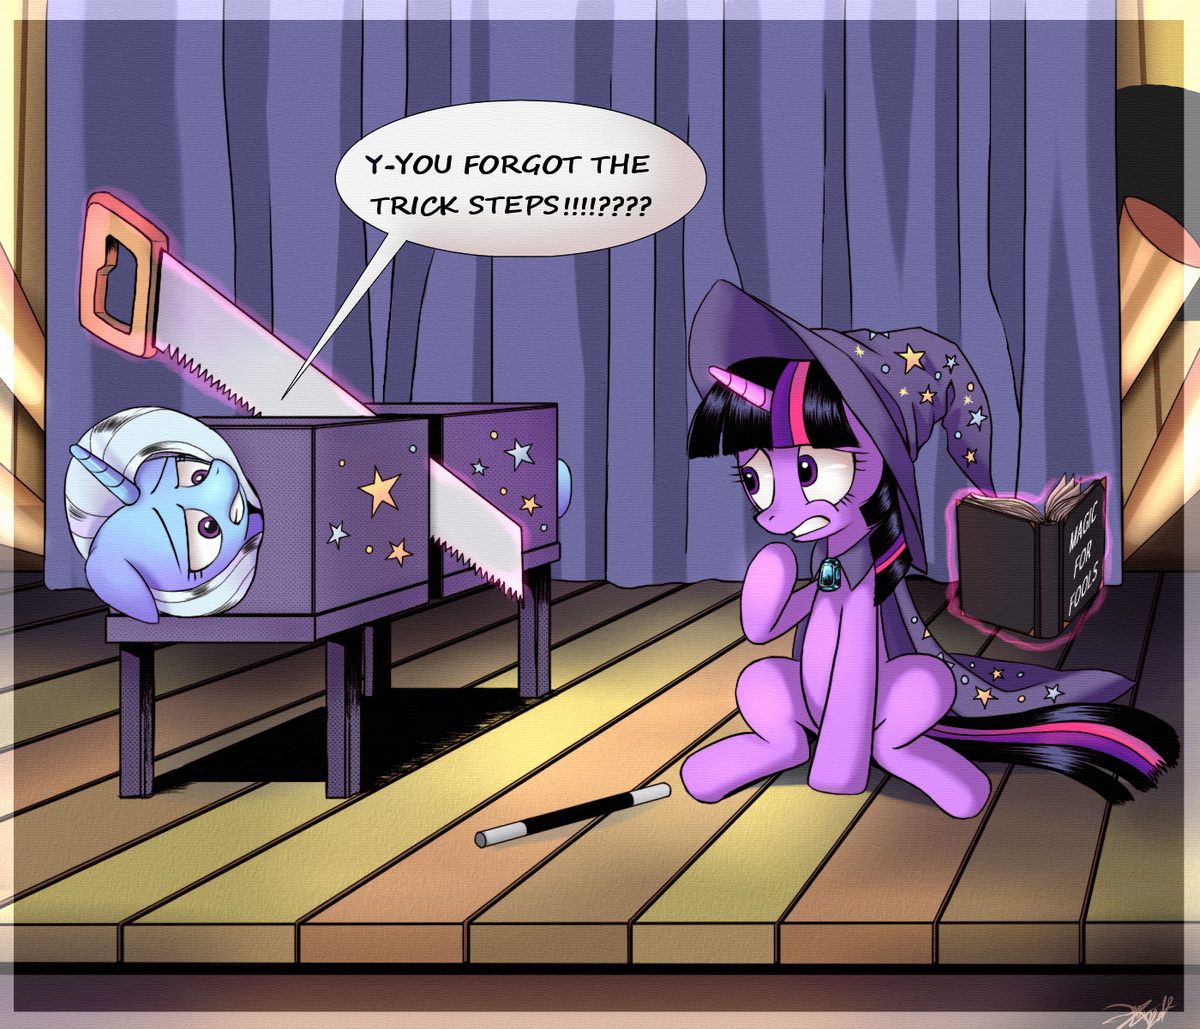 the silly adventures of trixie and twili